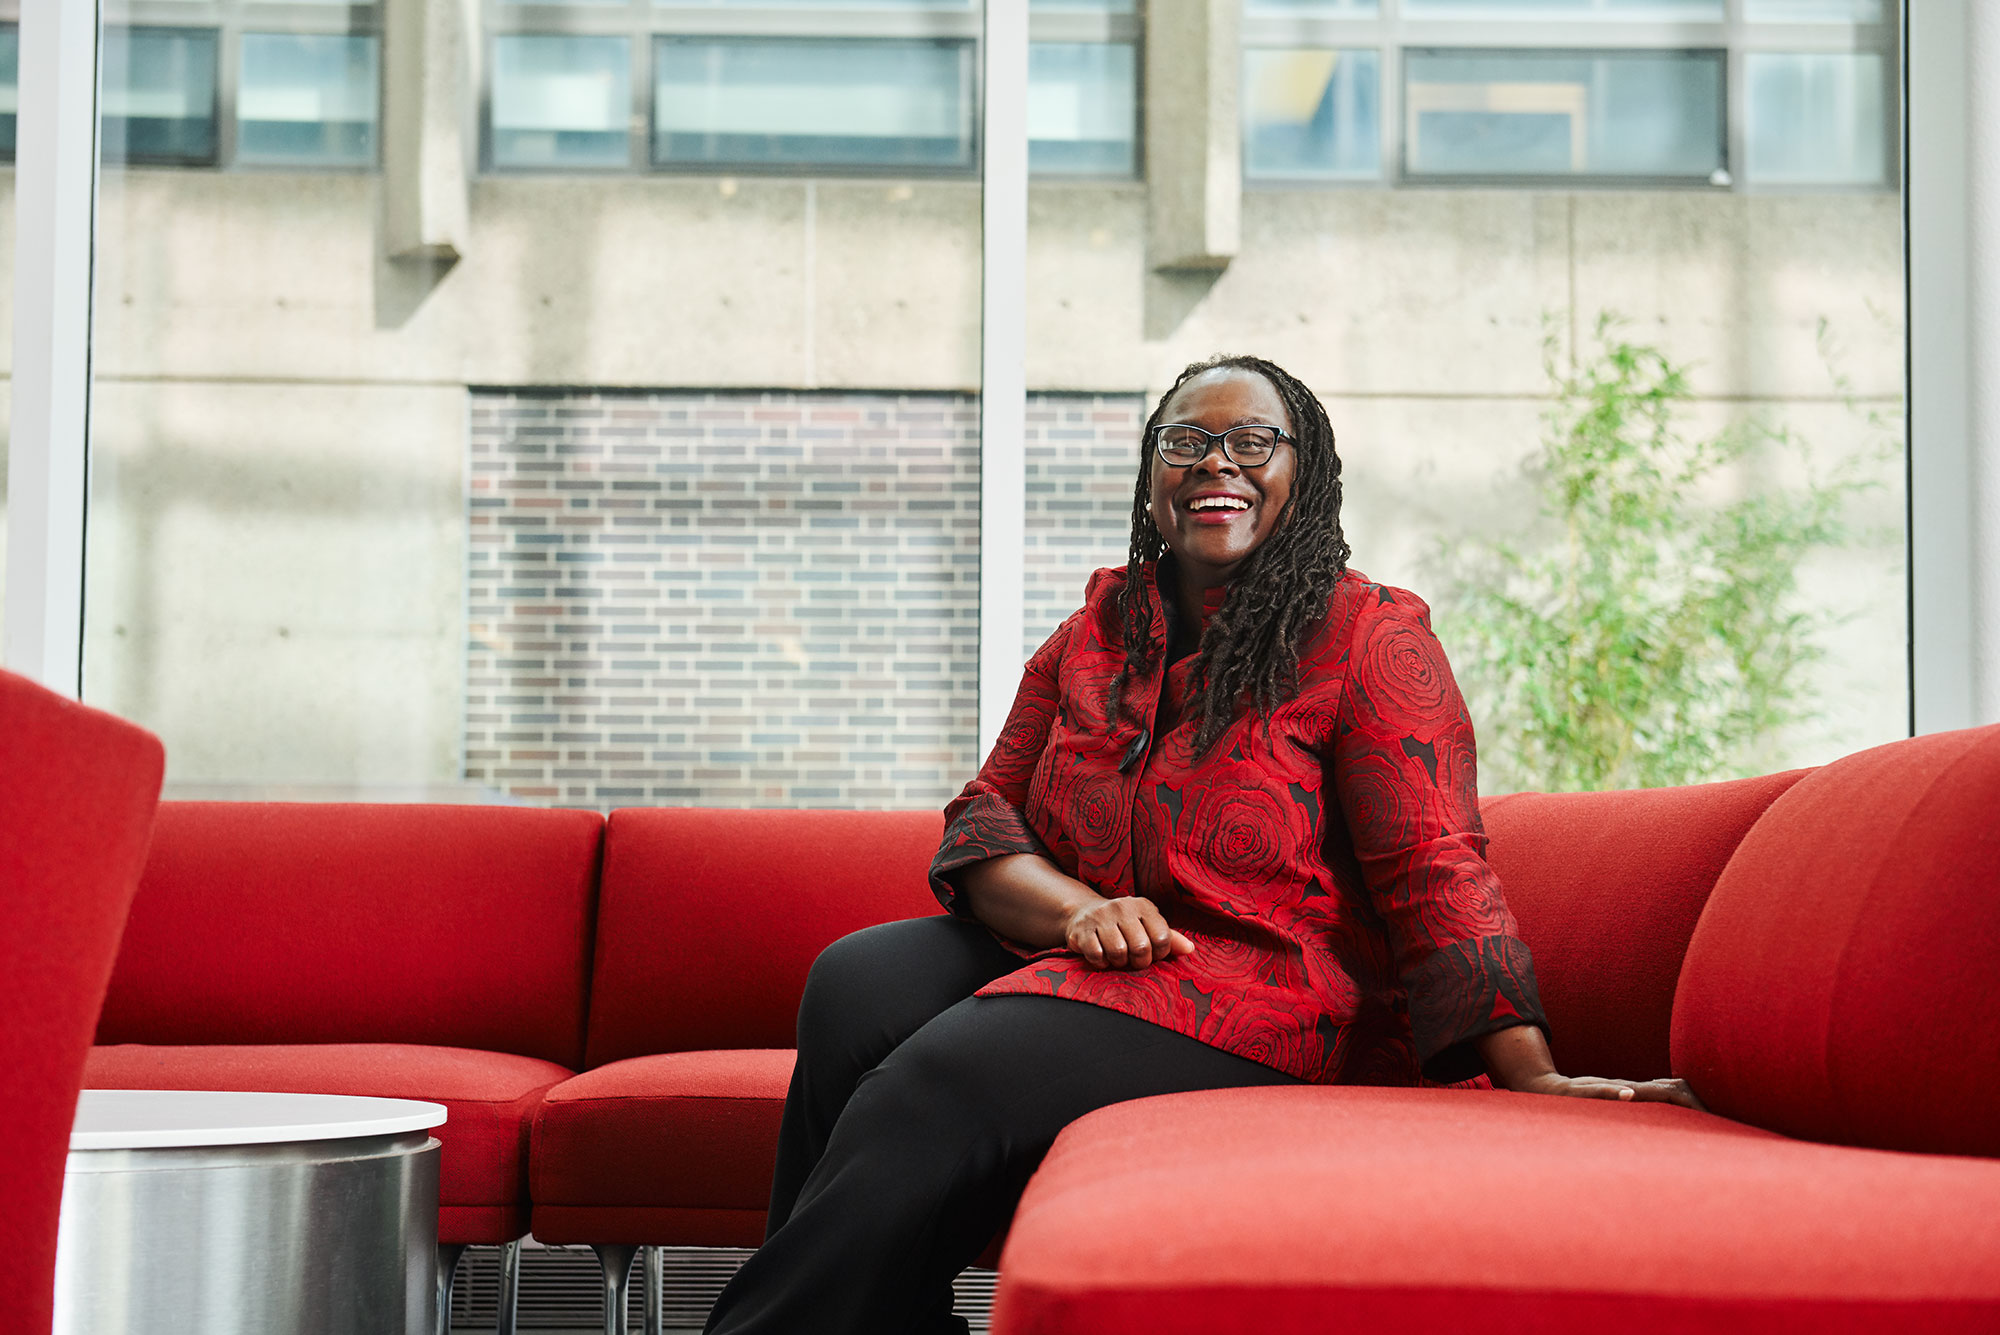 Photo of Law Dean Angela Onwuachi-Willig with a red and black floral blouse sitting on a red couch in and smiling.